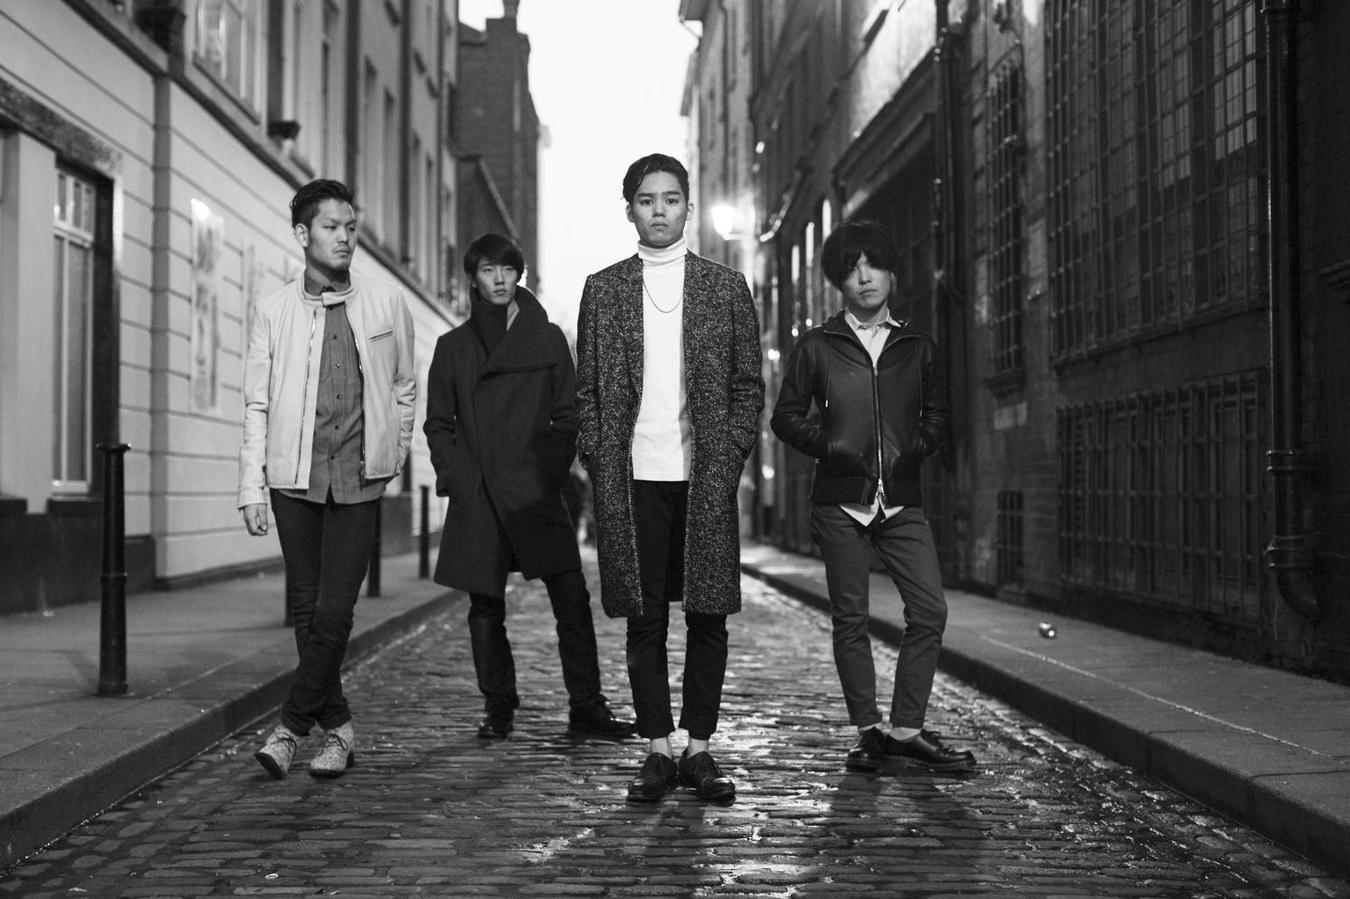 The Fin, Japan&#039;s Answer to the Shins, to perform March 4 at Yugong Yishan